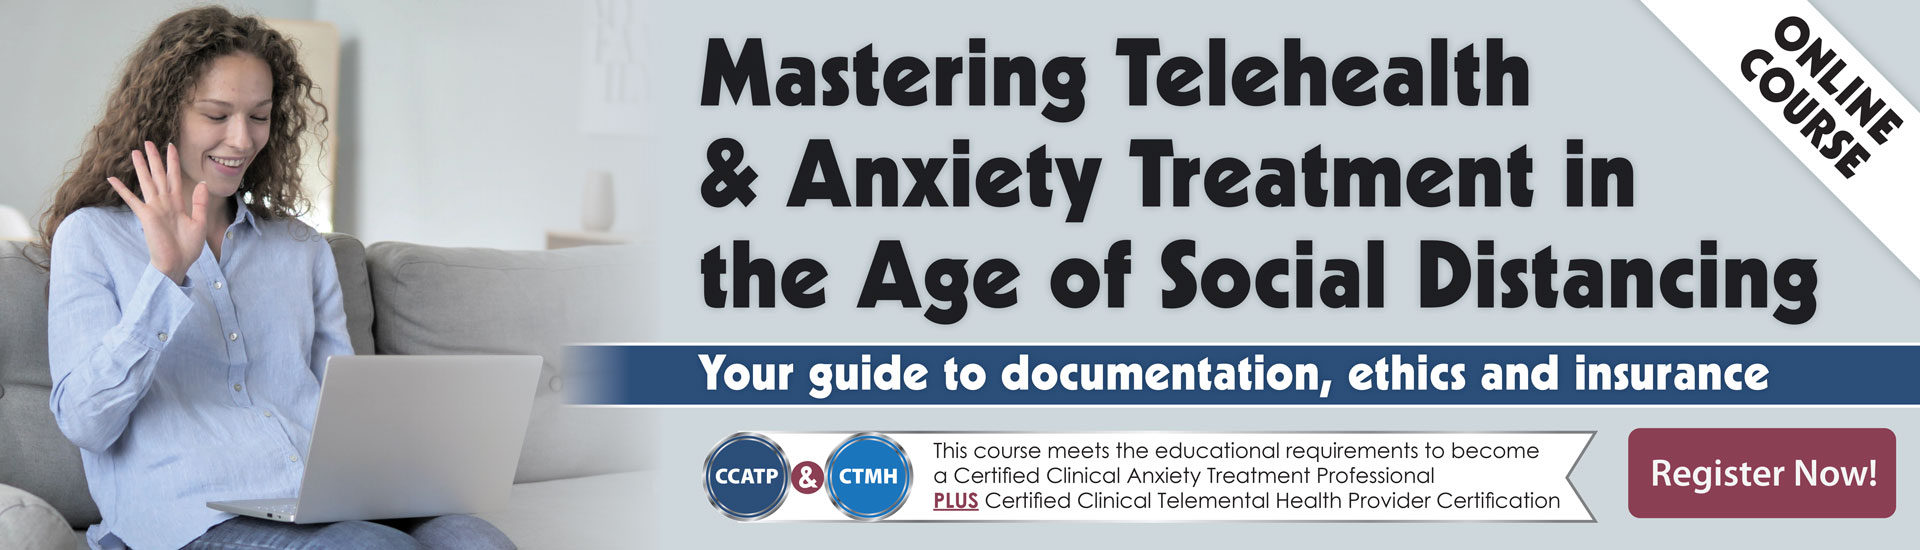 Mastering Telehealth & Anxiety Treatment in the Age of Social Distancing